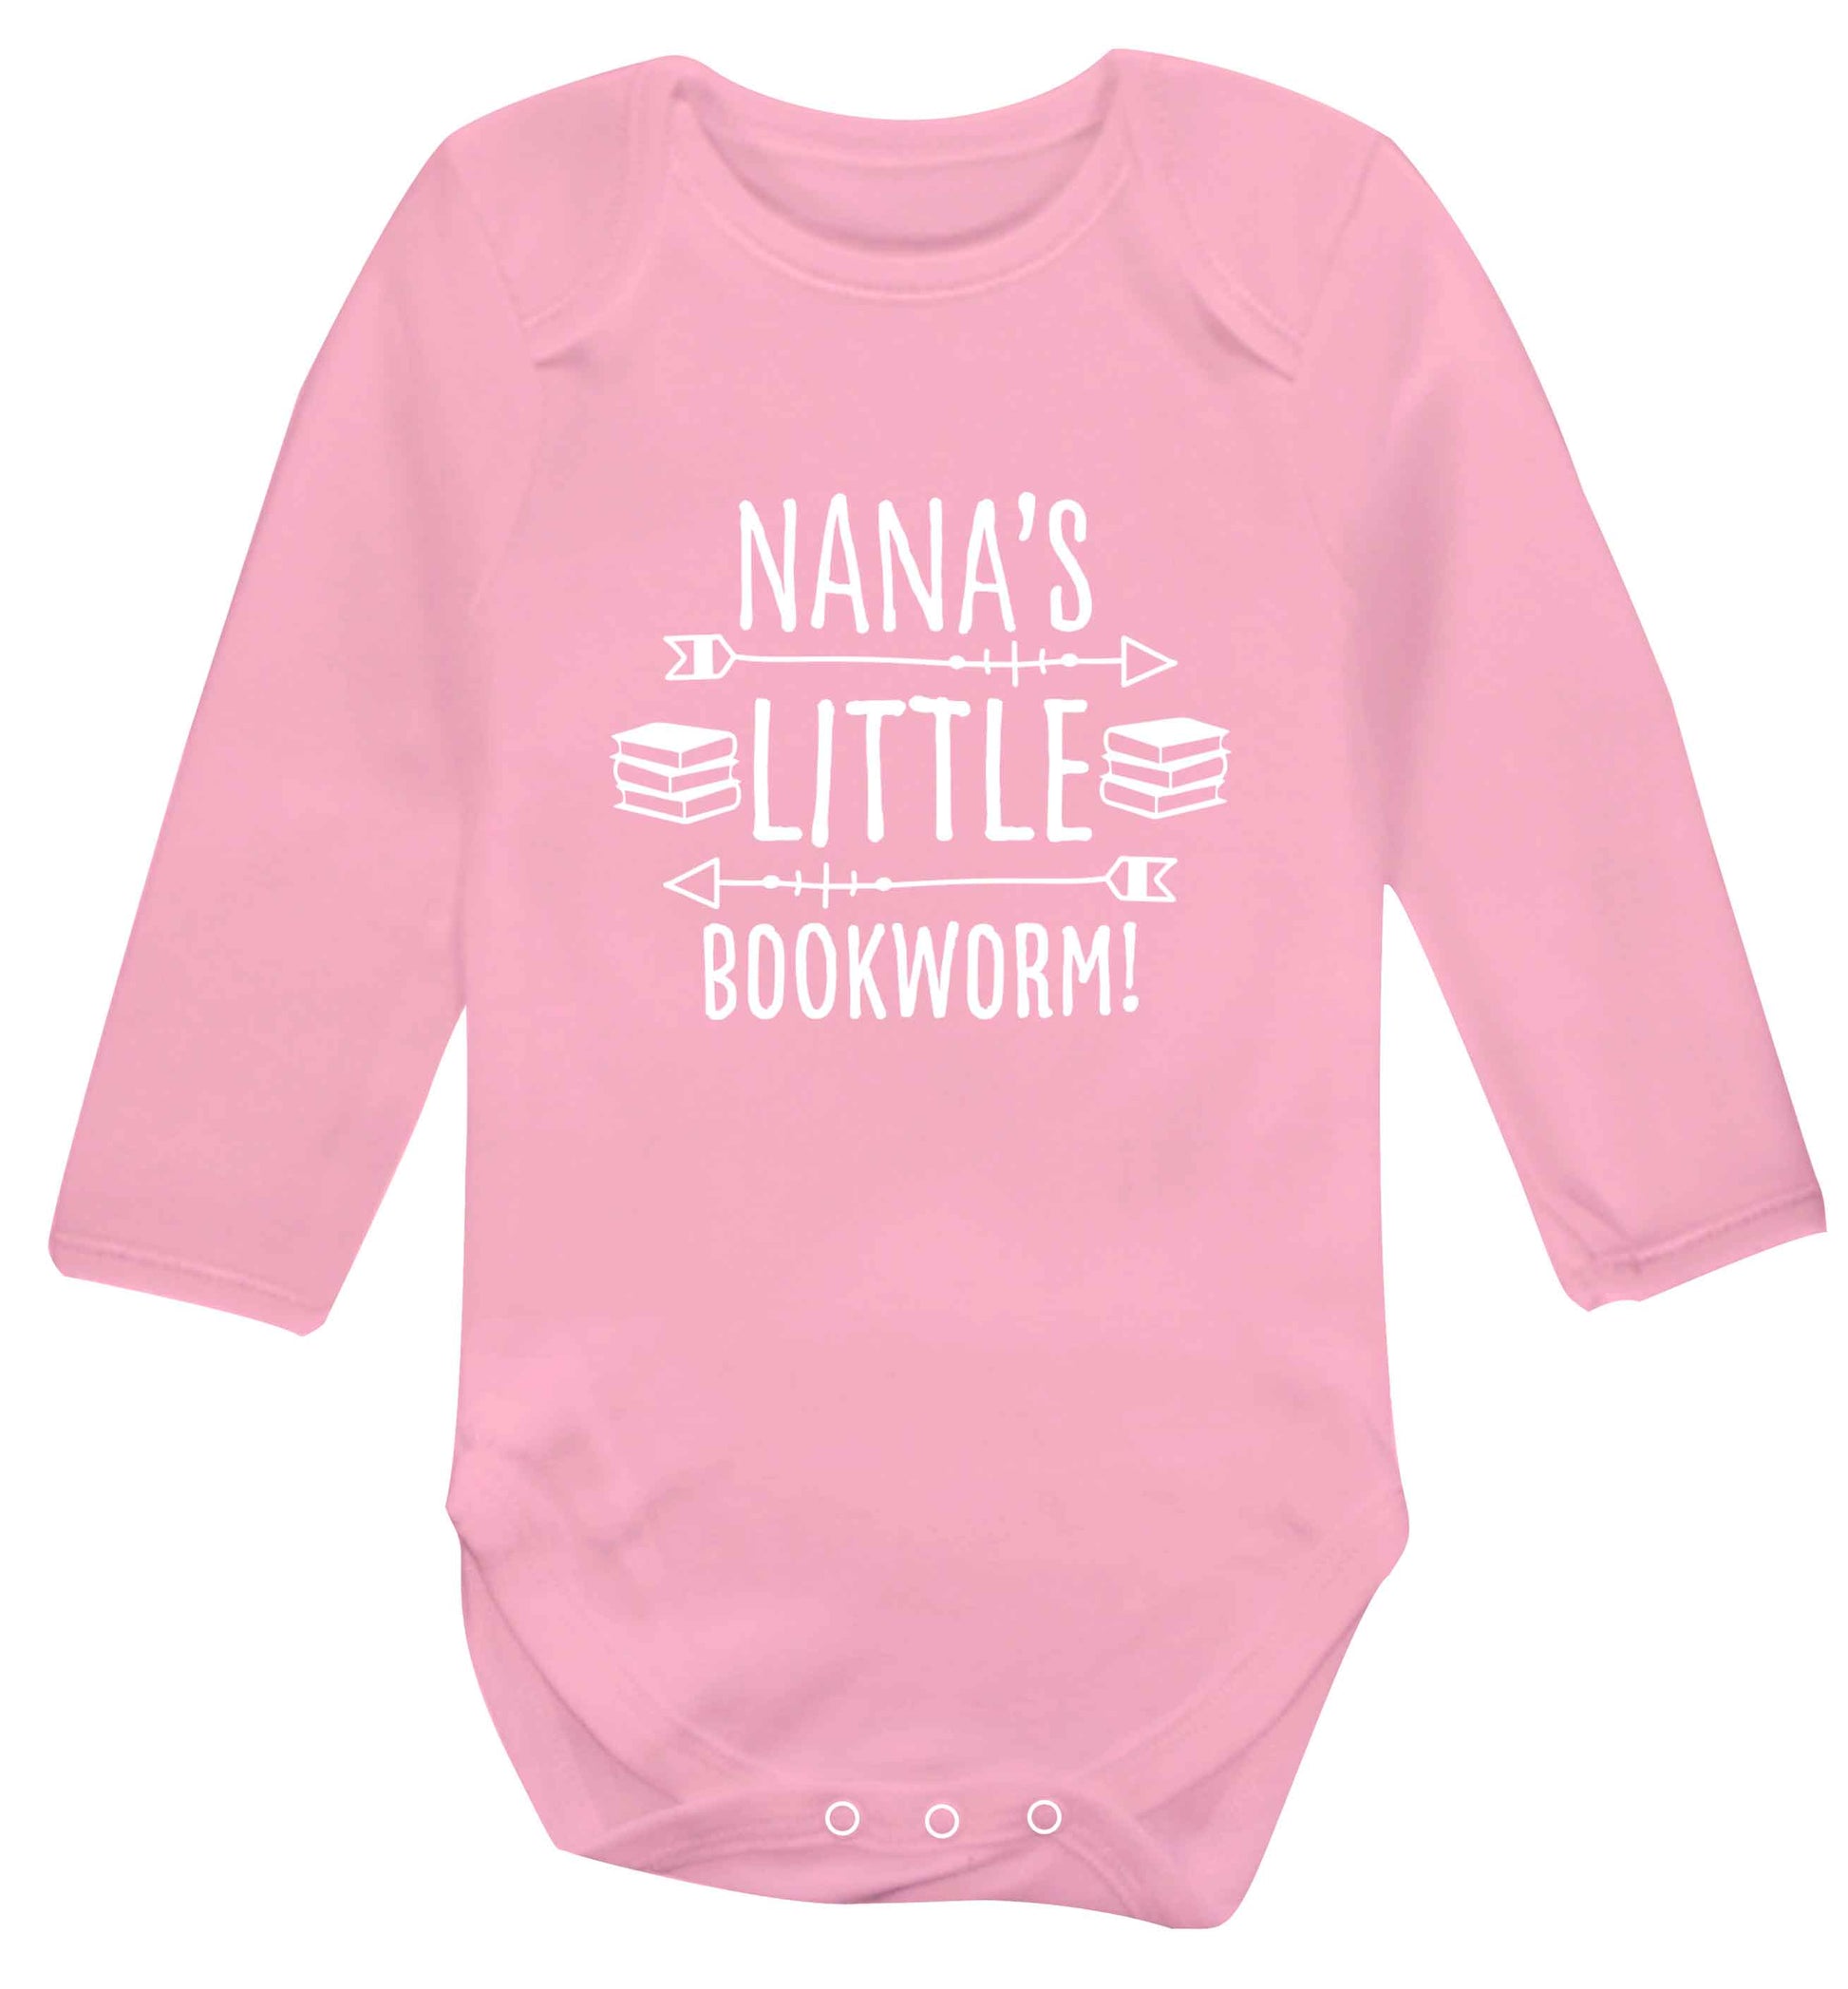 Nana's little bookworm baby vest long sleeved pale pink 6-12 months